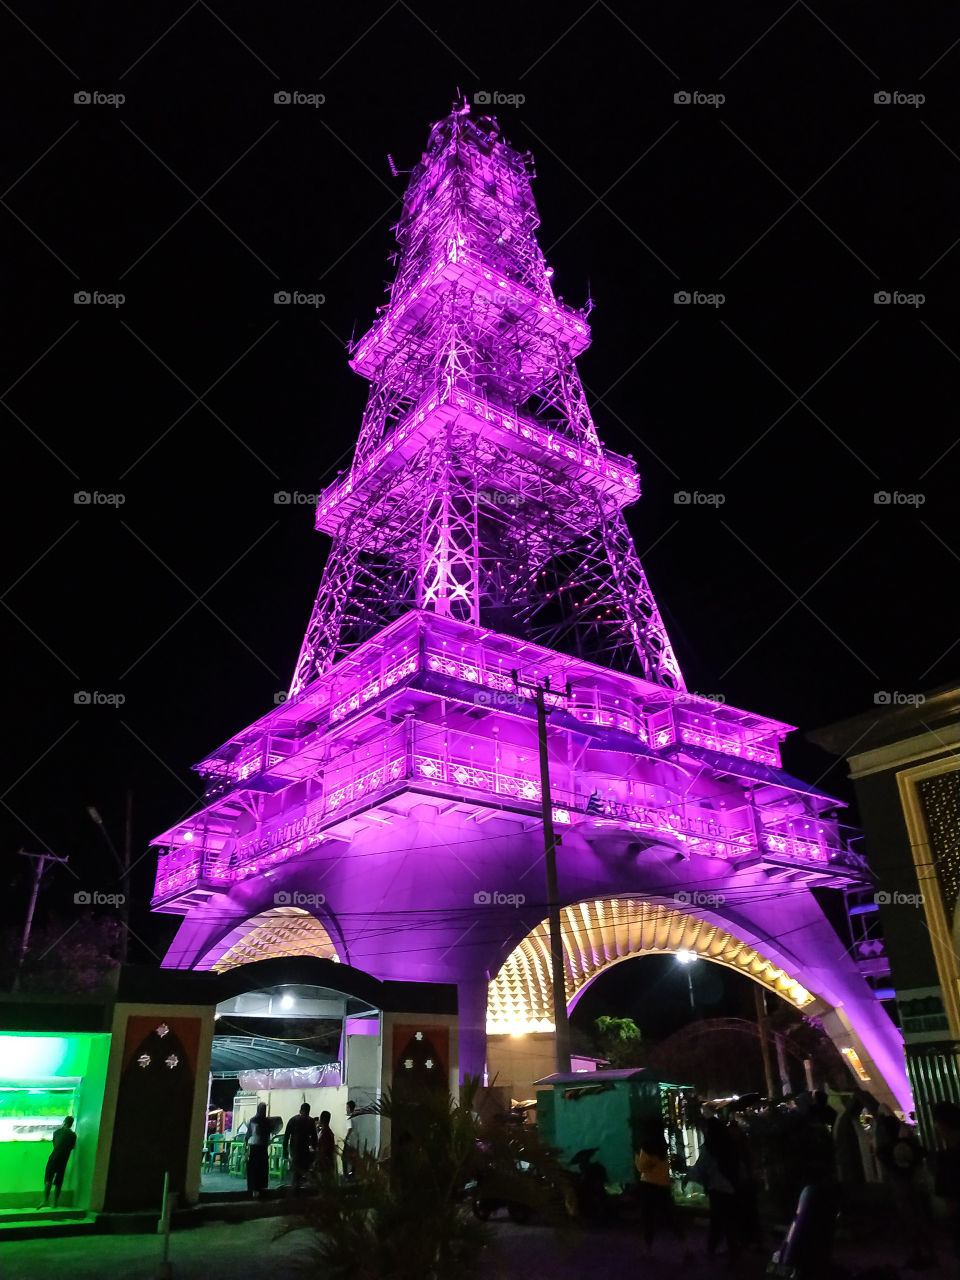 The Gobels Tower,  its look like Eiffel tower